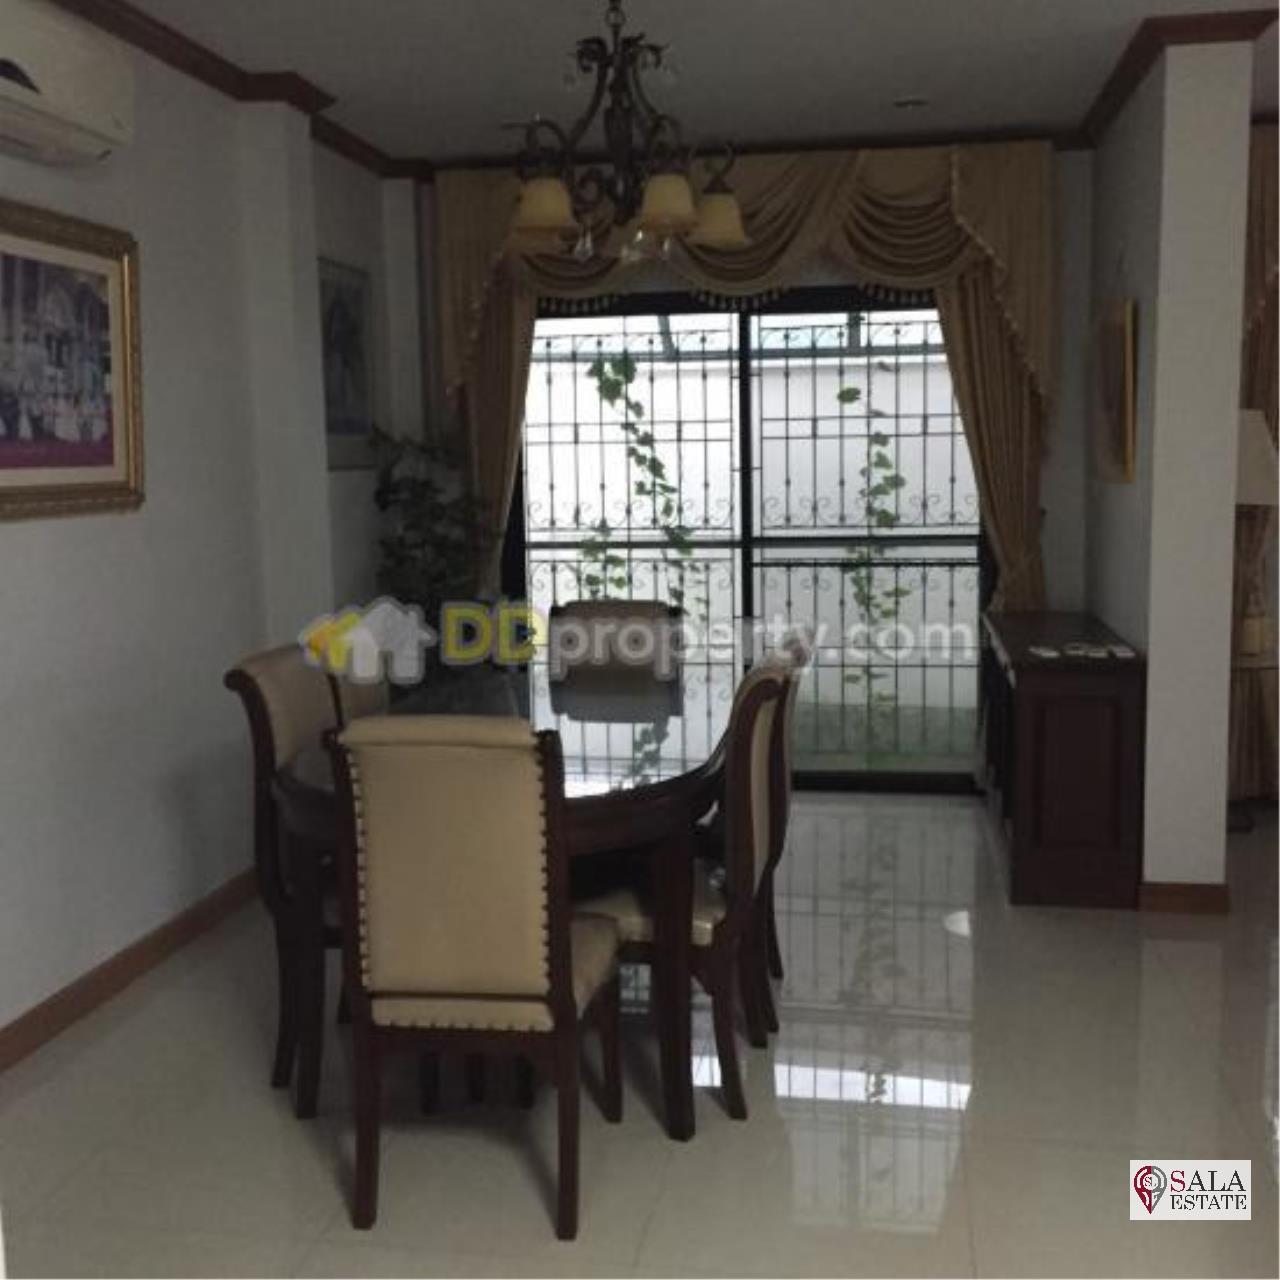 SALA ESTATE Agency's HOUSE FOR SALE - NEAR SUVARNABHUM AIRPORT AND BANG NA -TRAT RD. 6